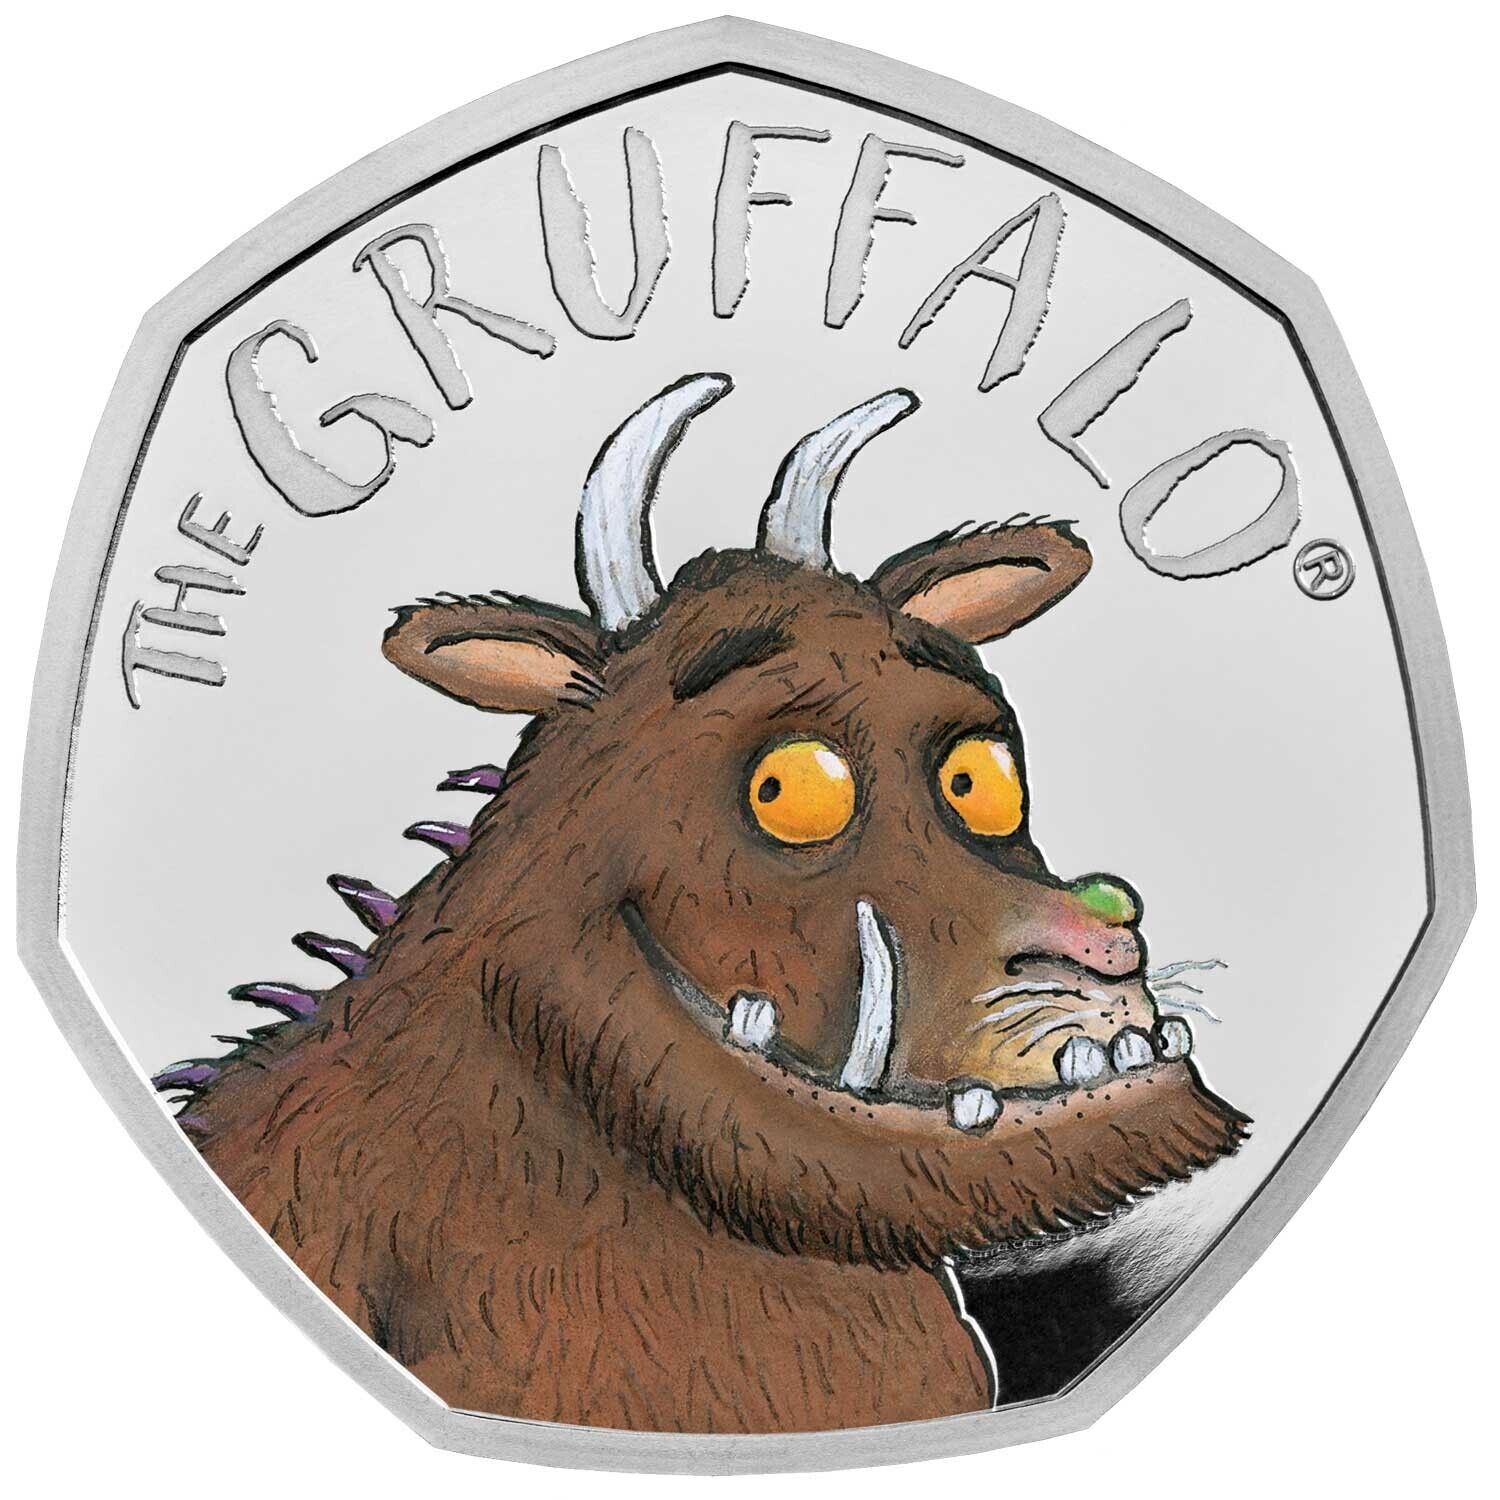 2019 The Gruffalo UK 50p Silver Proof Coin by Royal Mint - Julia Donaldson Book